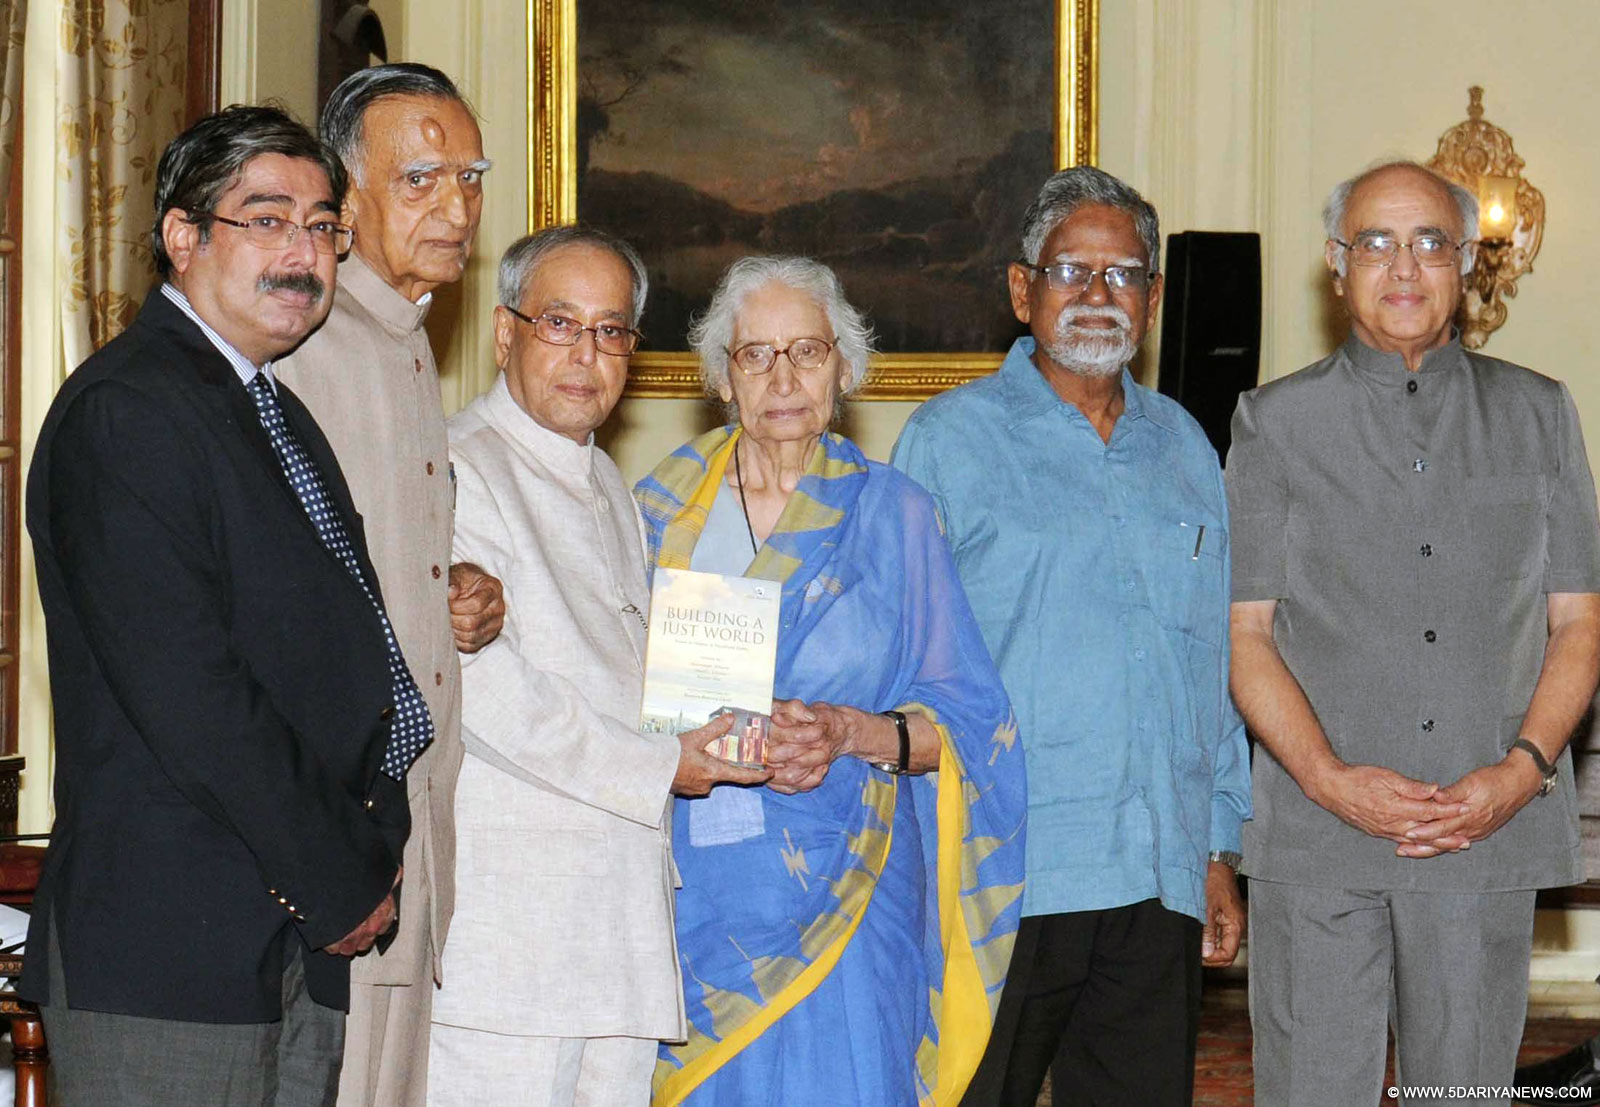 The President, Pranab Mukherjee receiving the first copy of the book ‘Building A Just World Essays in honour of Muchkund Dubey’, at Rashtrapati Bhavan, in New Delhi on September 21, 2015.